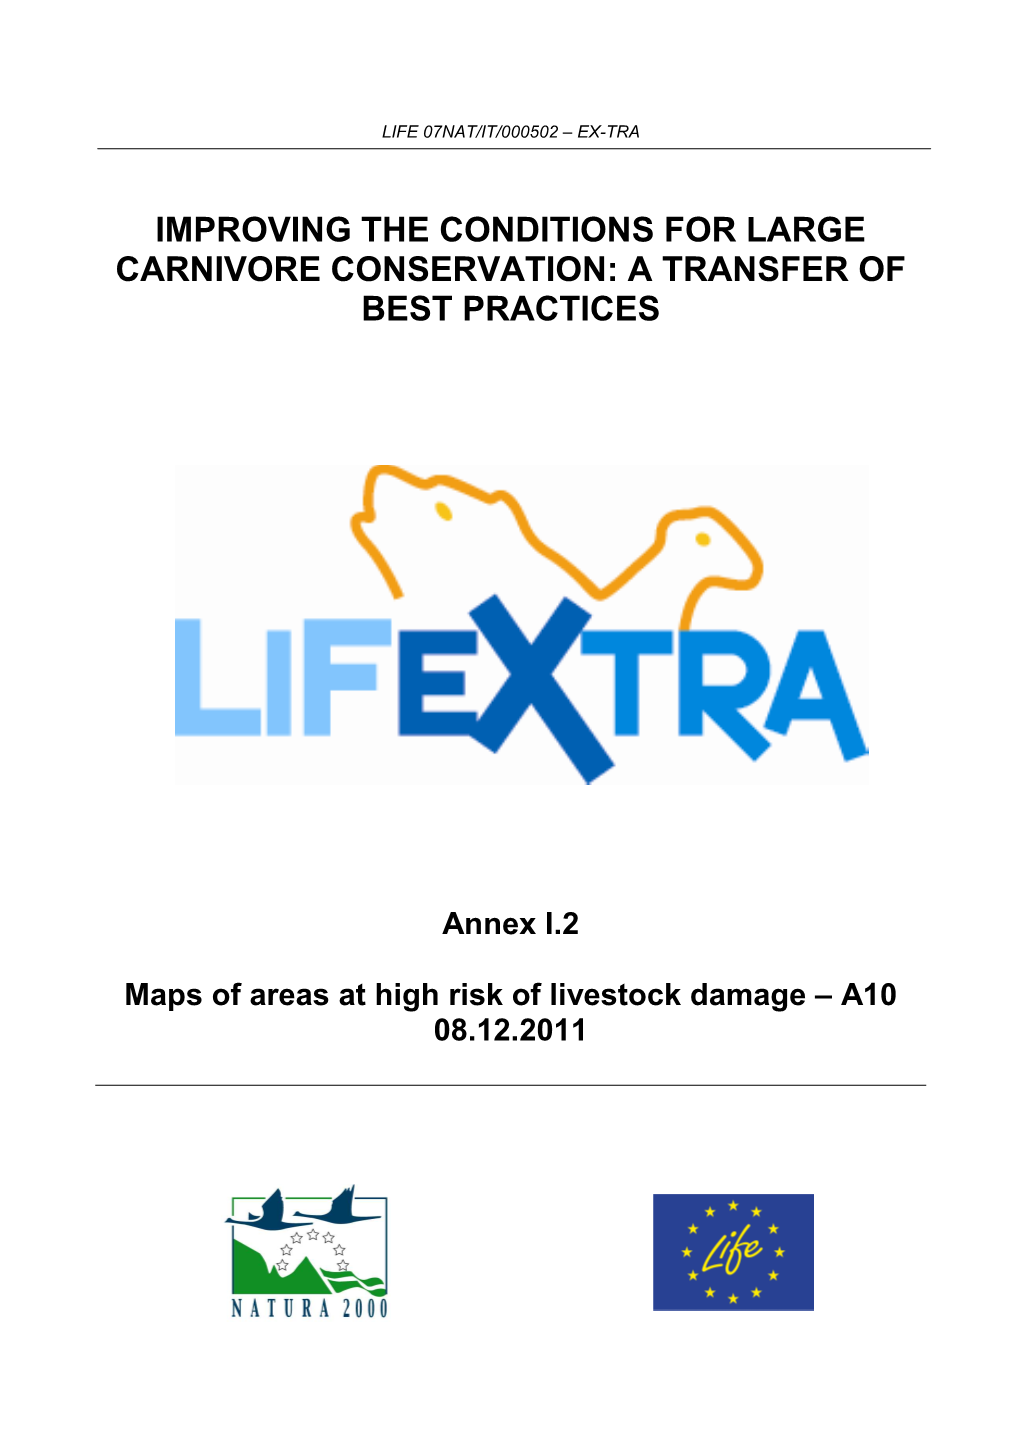 Improving the Conditions for Large Carnivore Conservation: a Transfer of Best Practices